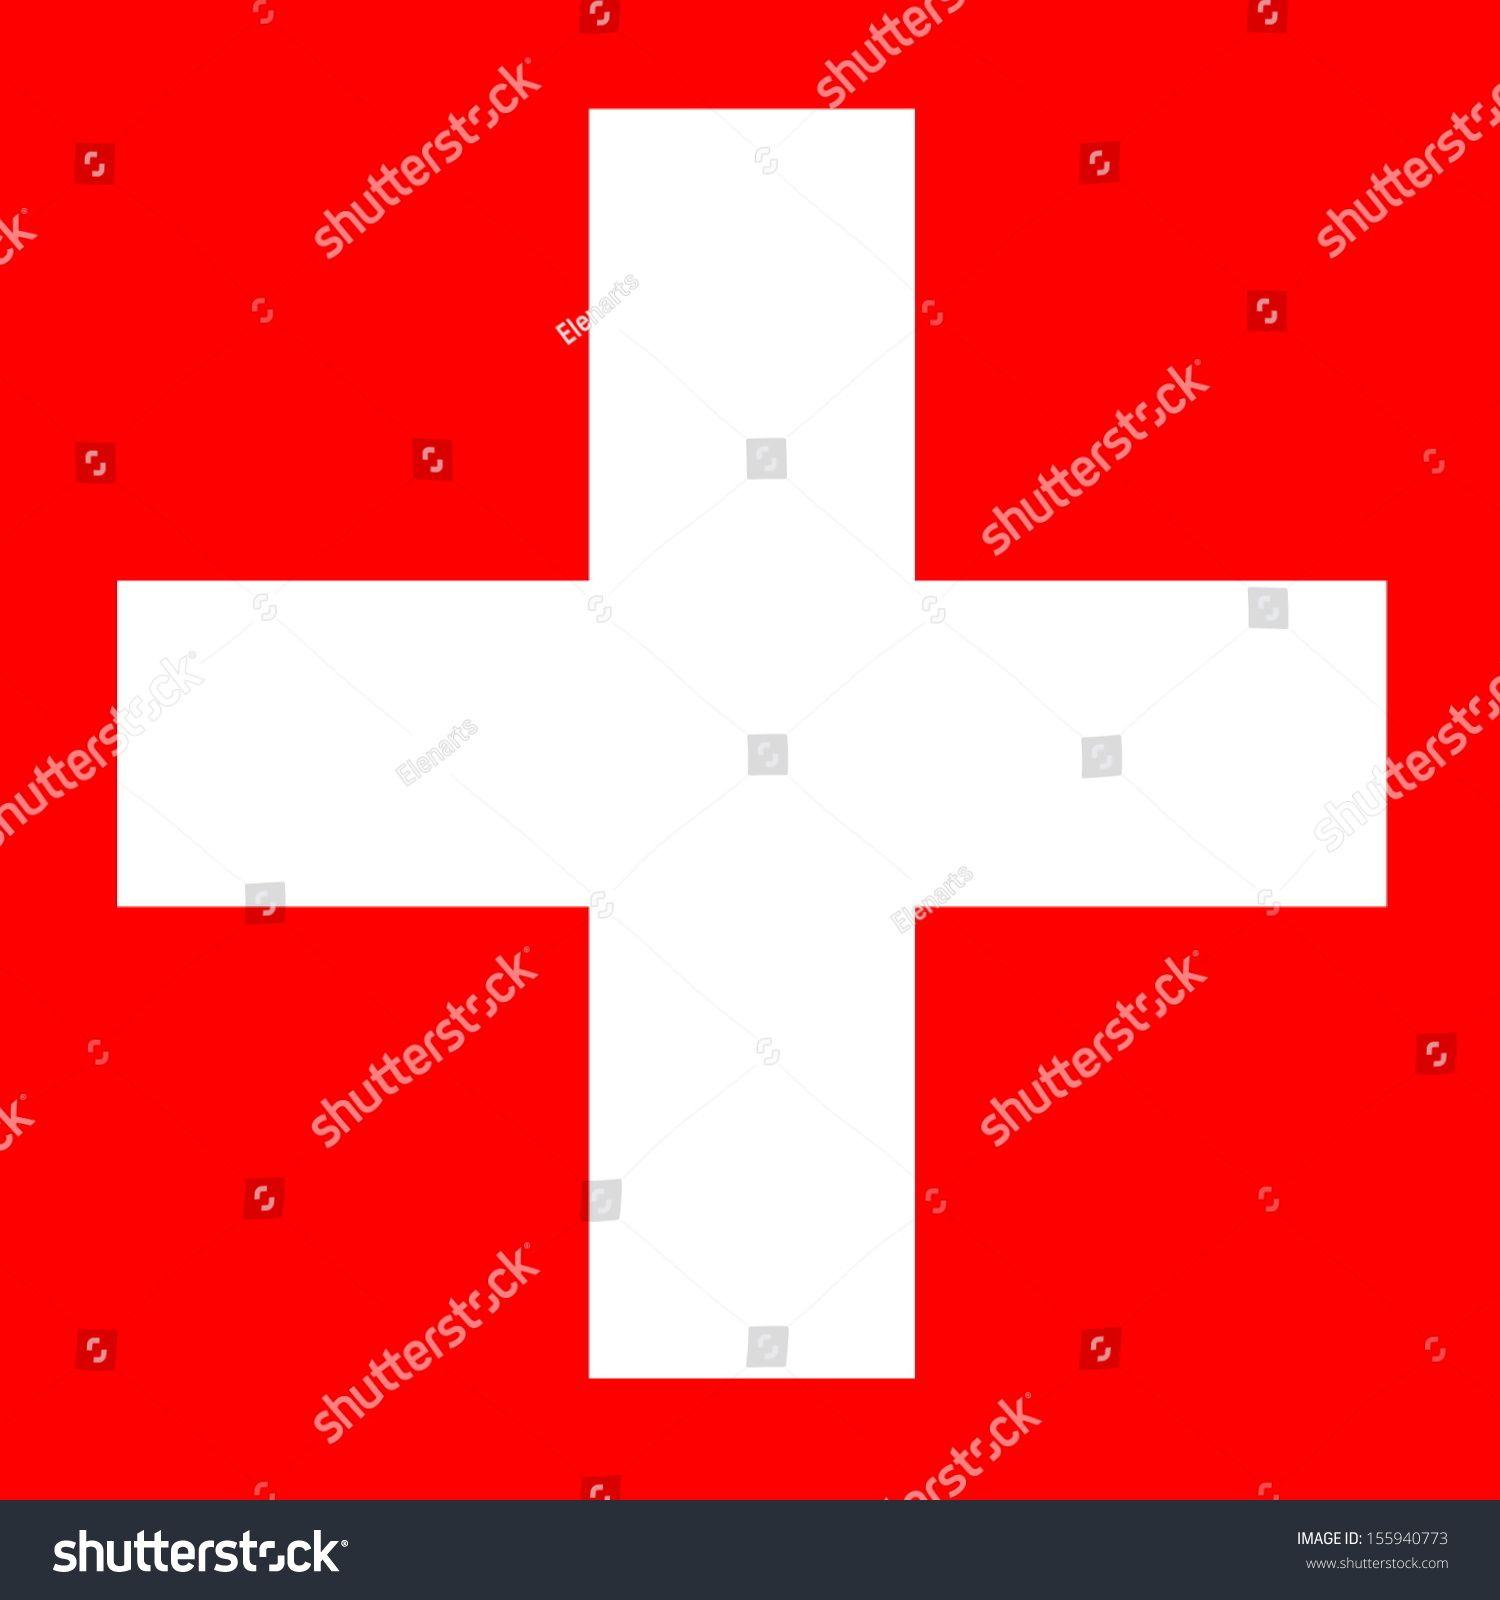 Red and White with a Name and the Square Logo - Red square white cross Logos